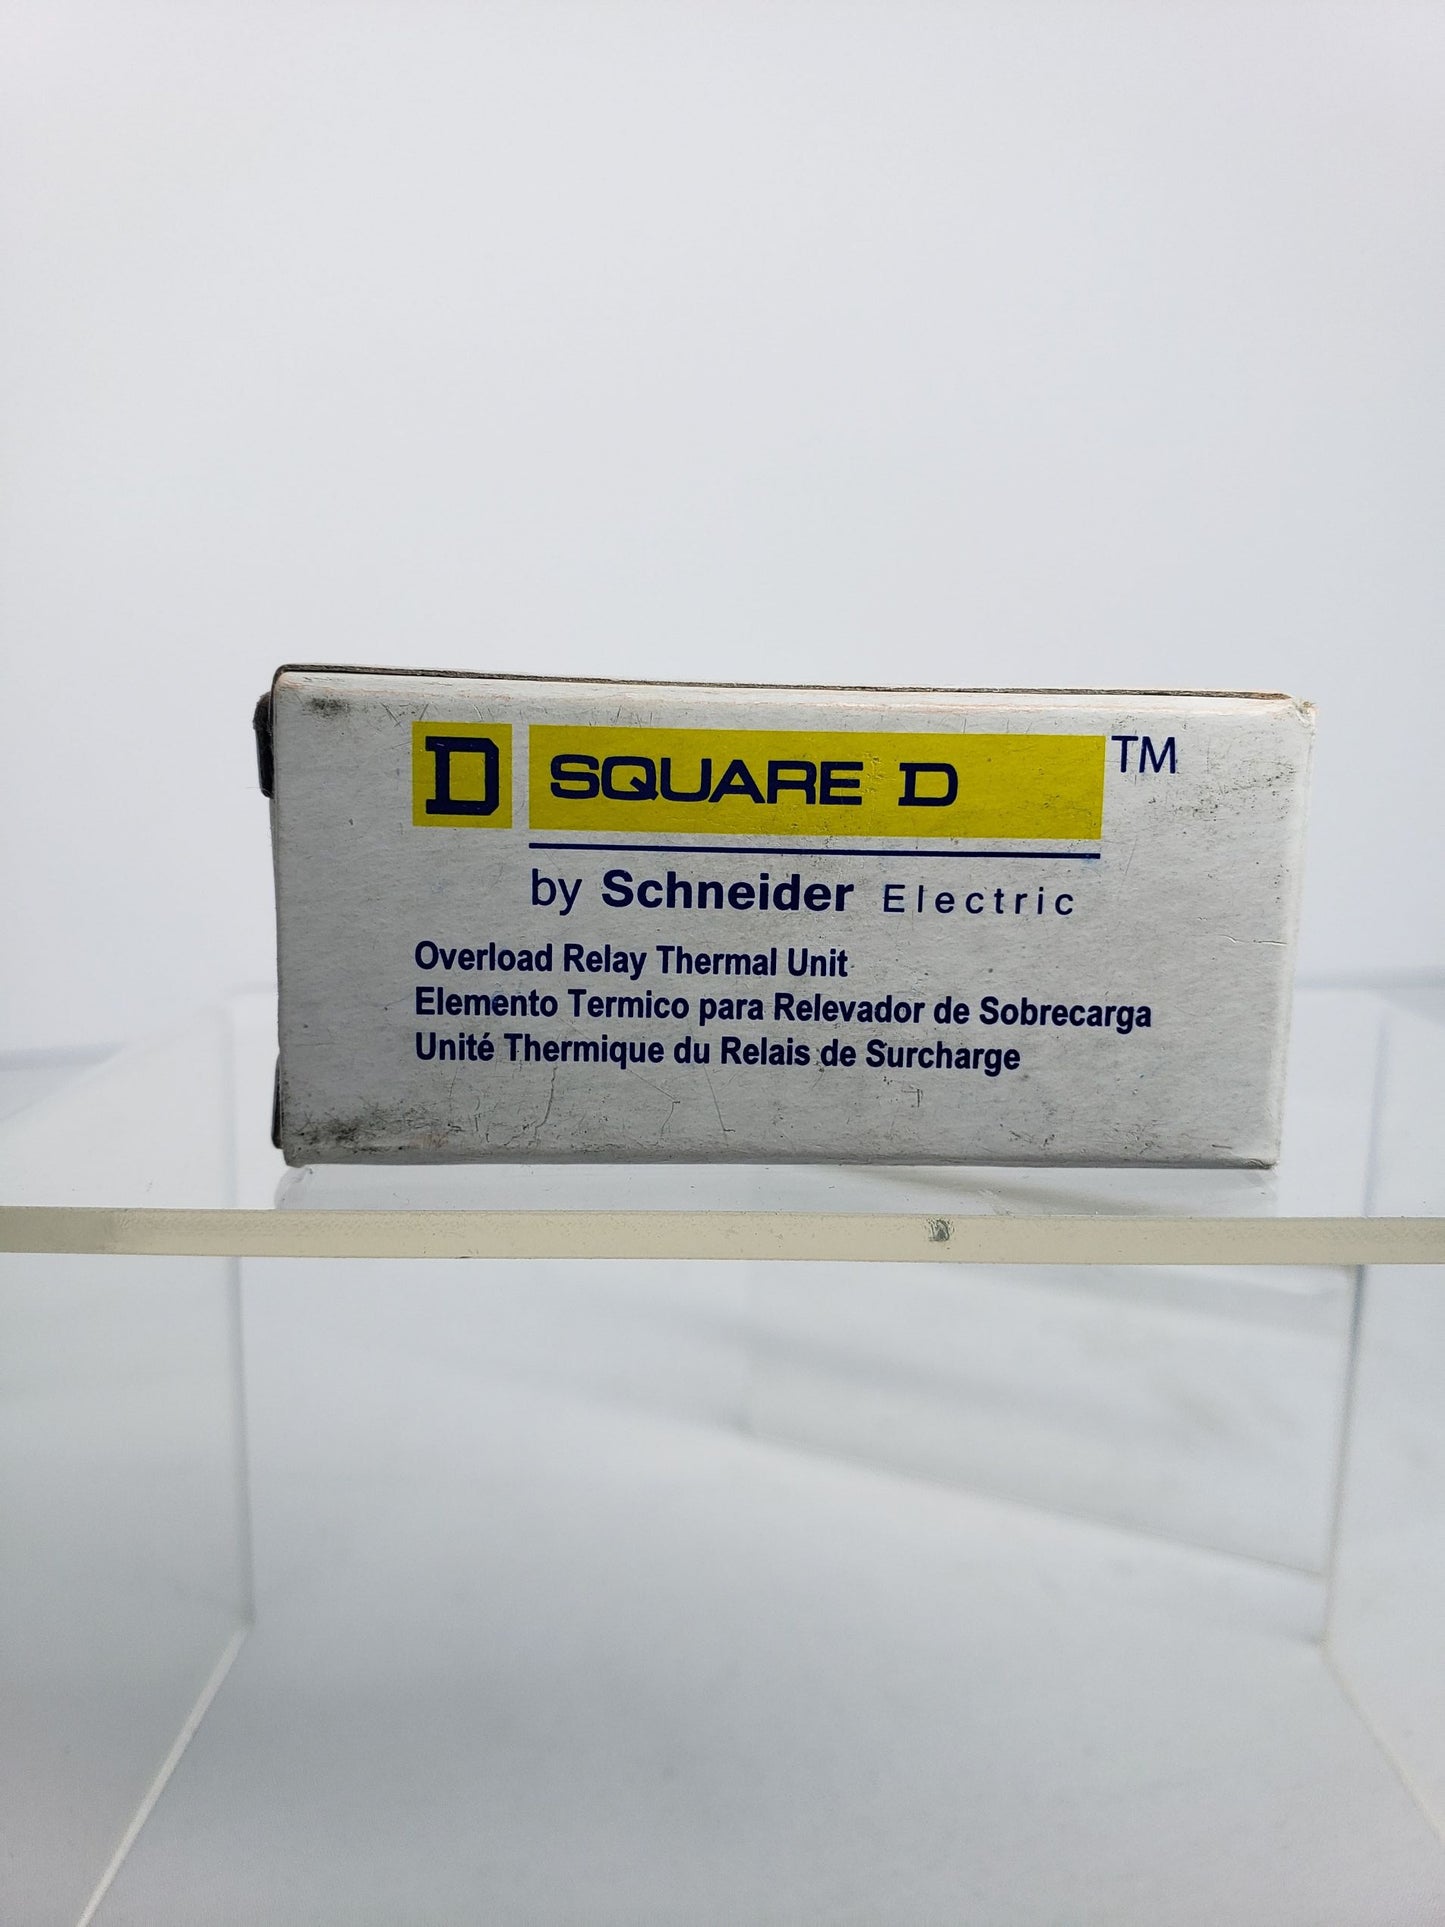 SCHNEIDER ELECTRIC B3.70 THERMAL OVERLOAD RELAY 1 PCS New Condition